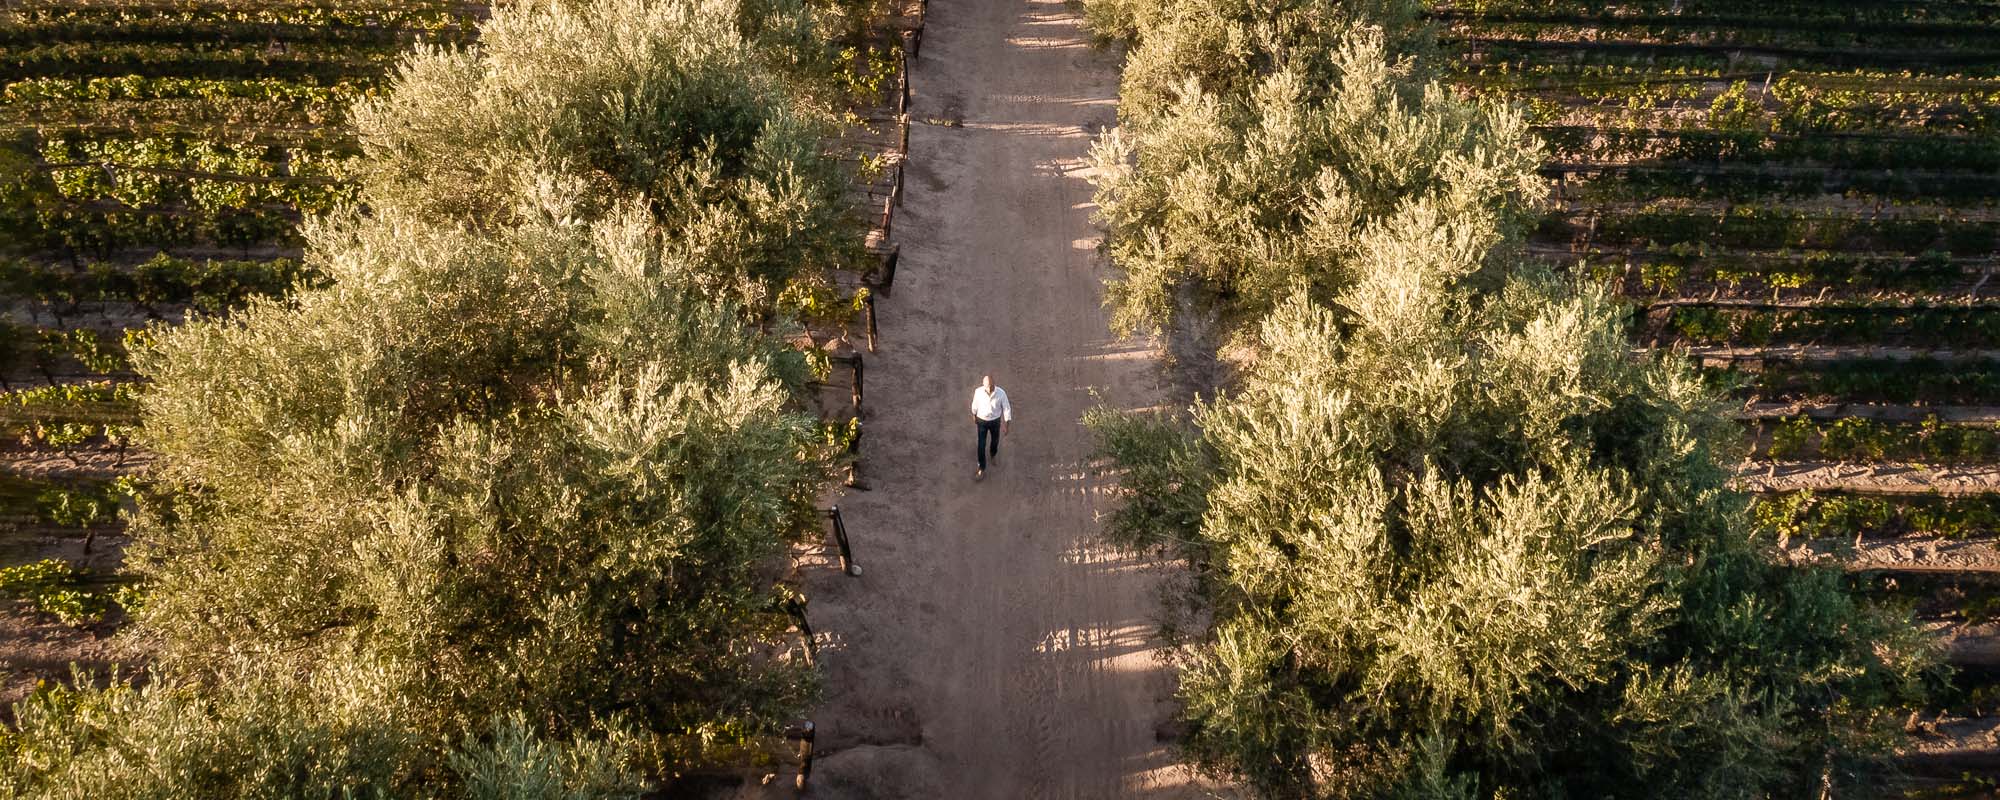 A birds-eye view photograph of a man walking along a dirt road that has vine rows to either side of it. 